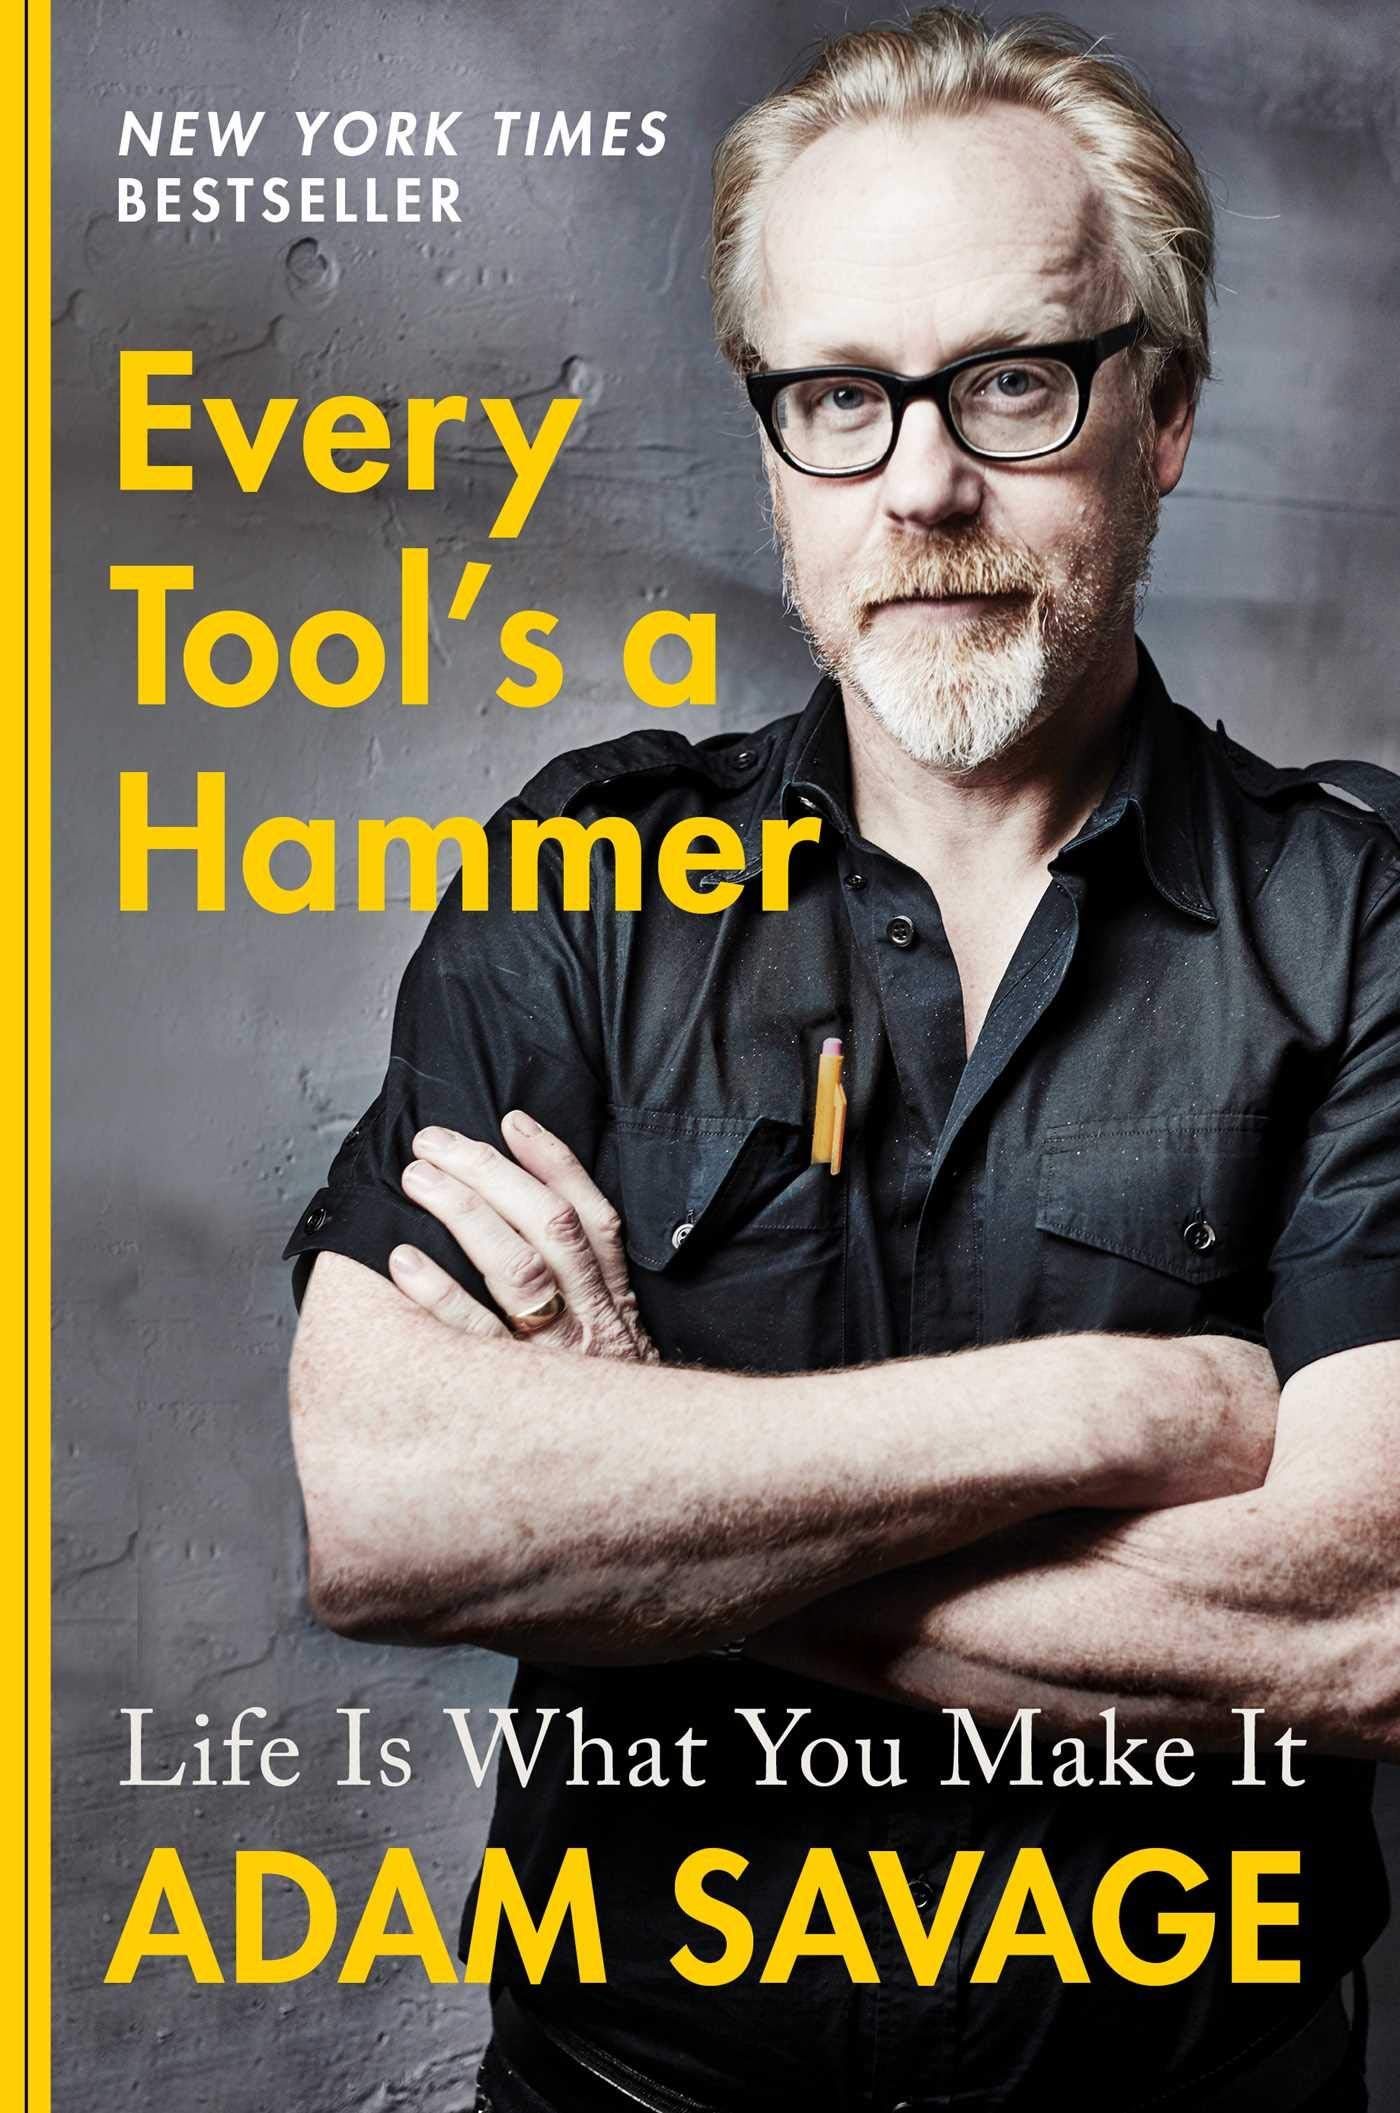 A cover of Adam Savage’s book Every Tool’s A Hammer